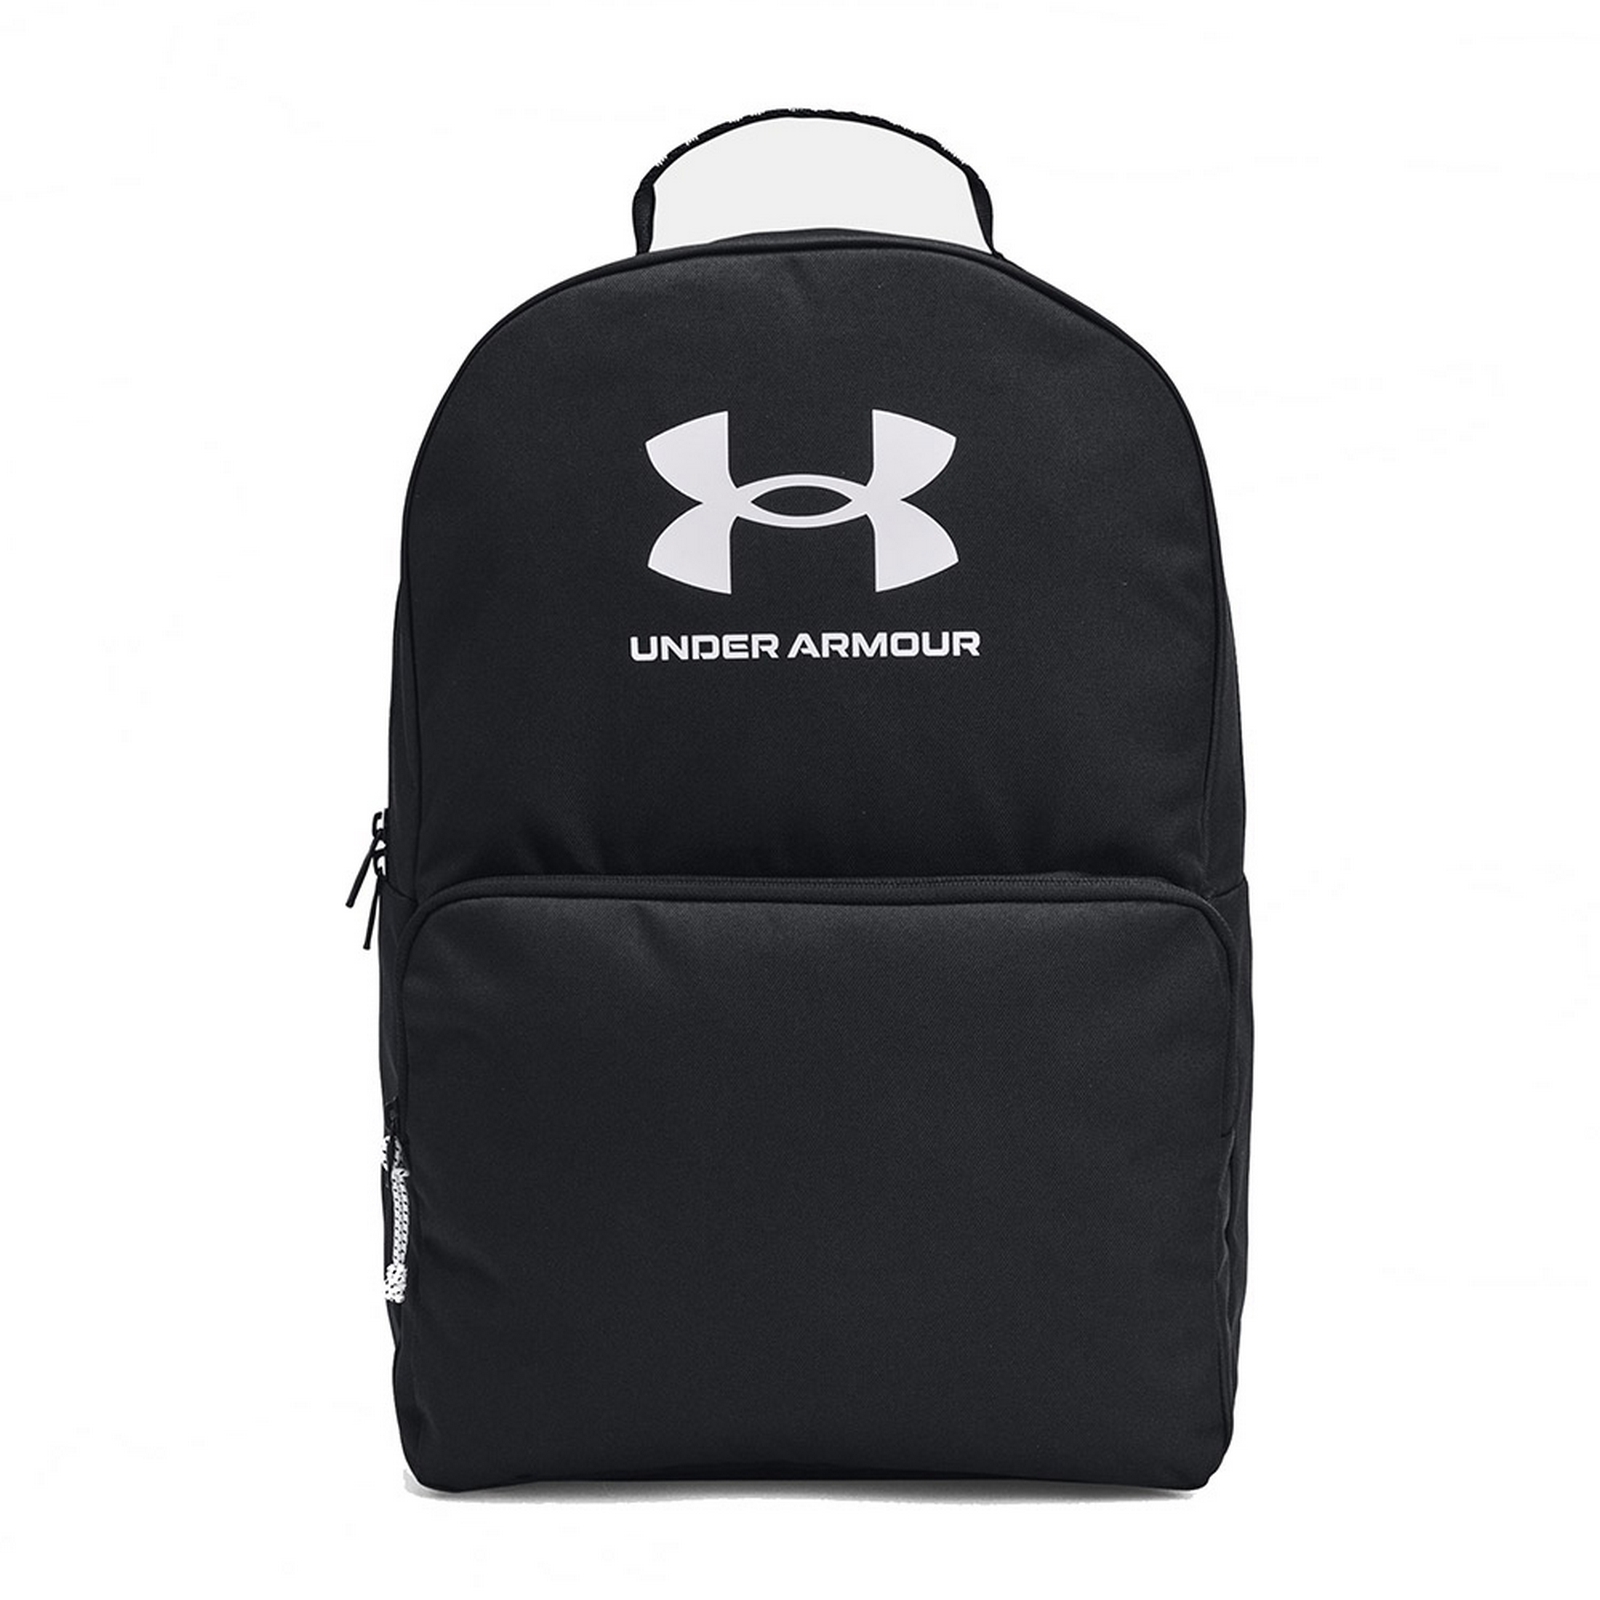   Loudon Backpack,  Under Armour 1378415-001 -